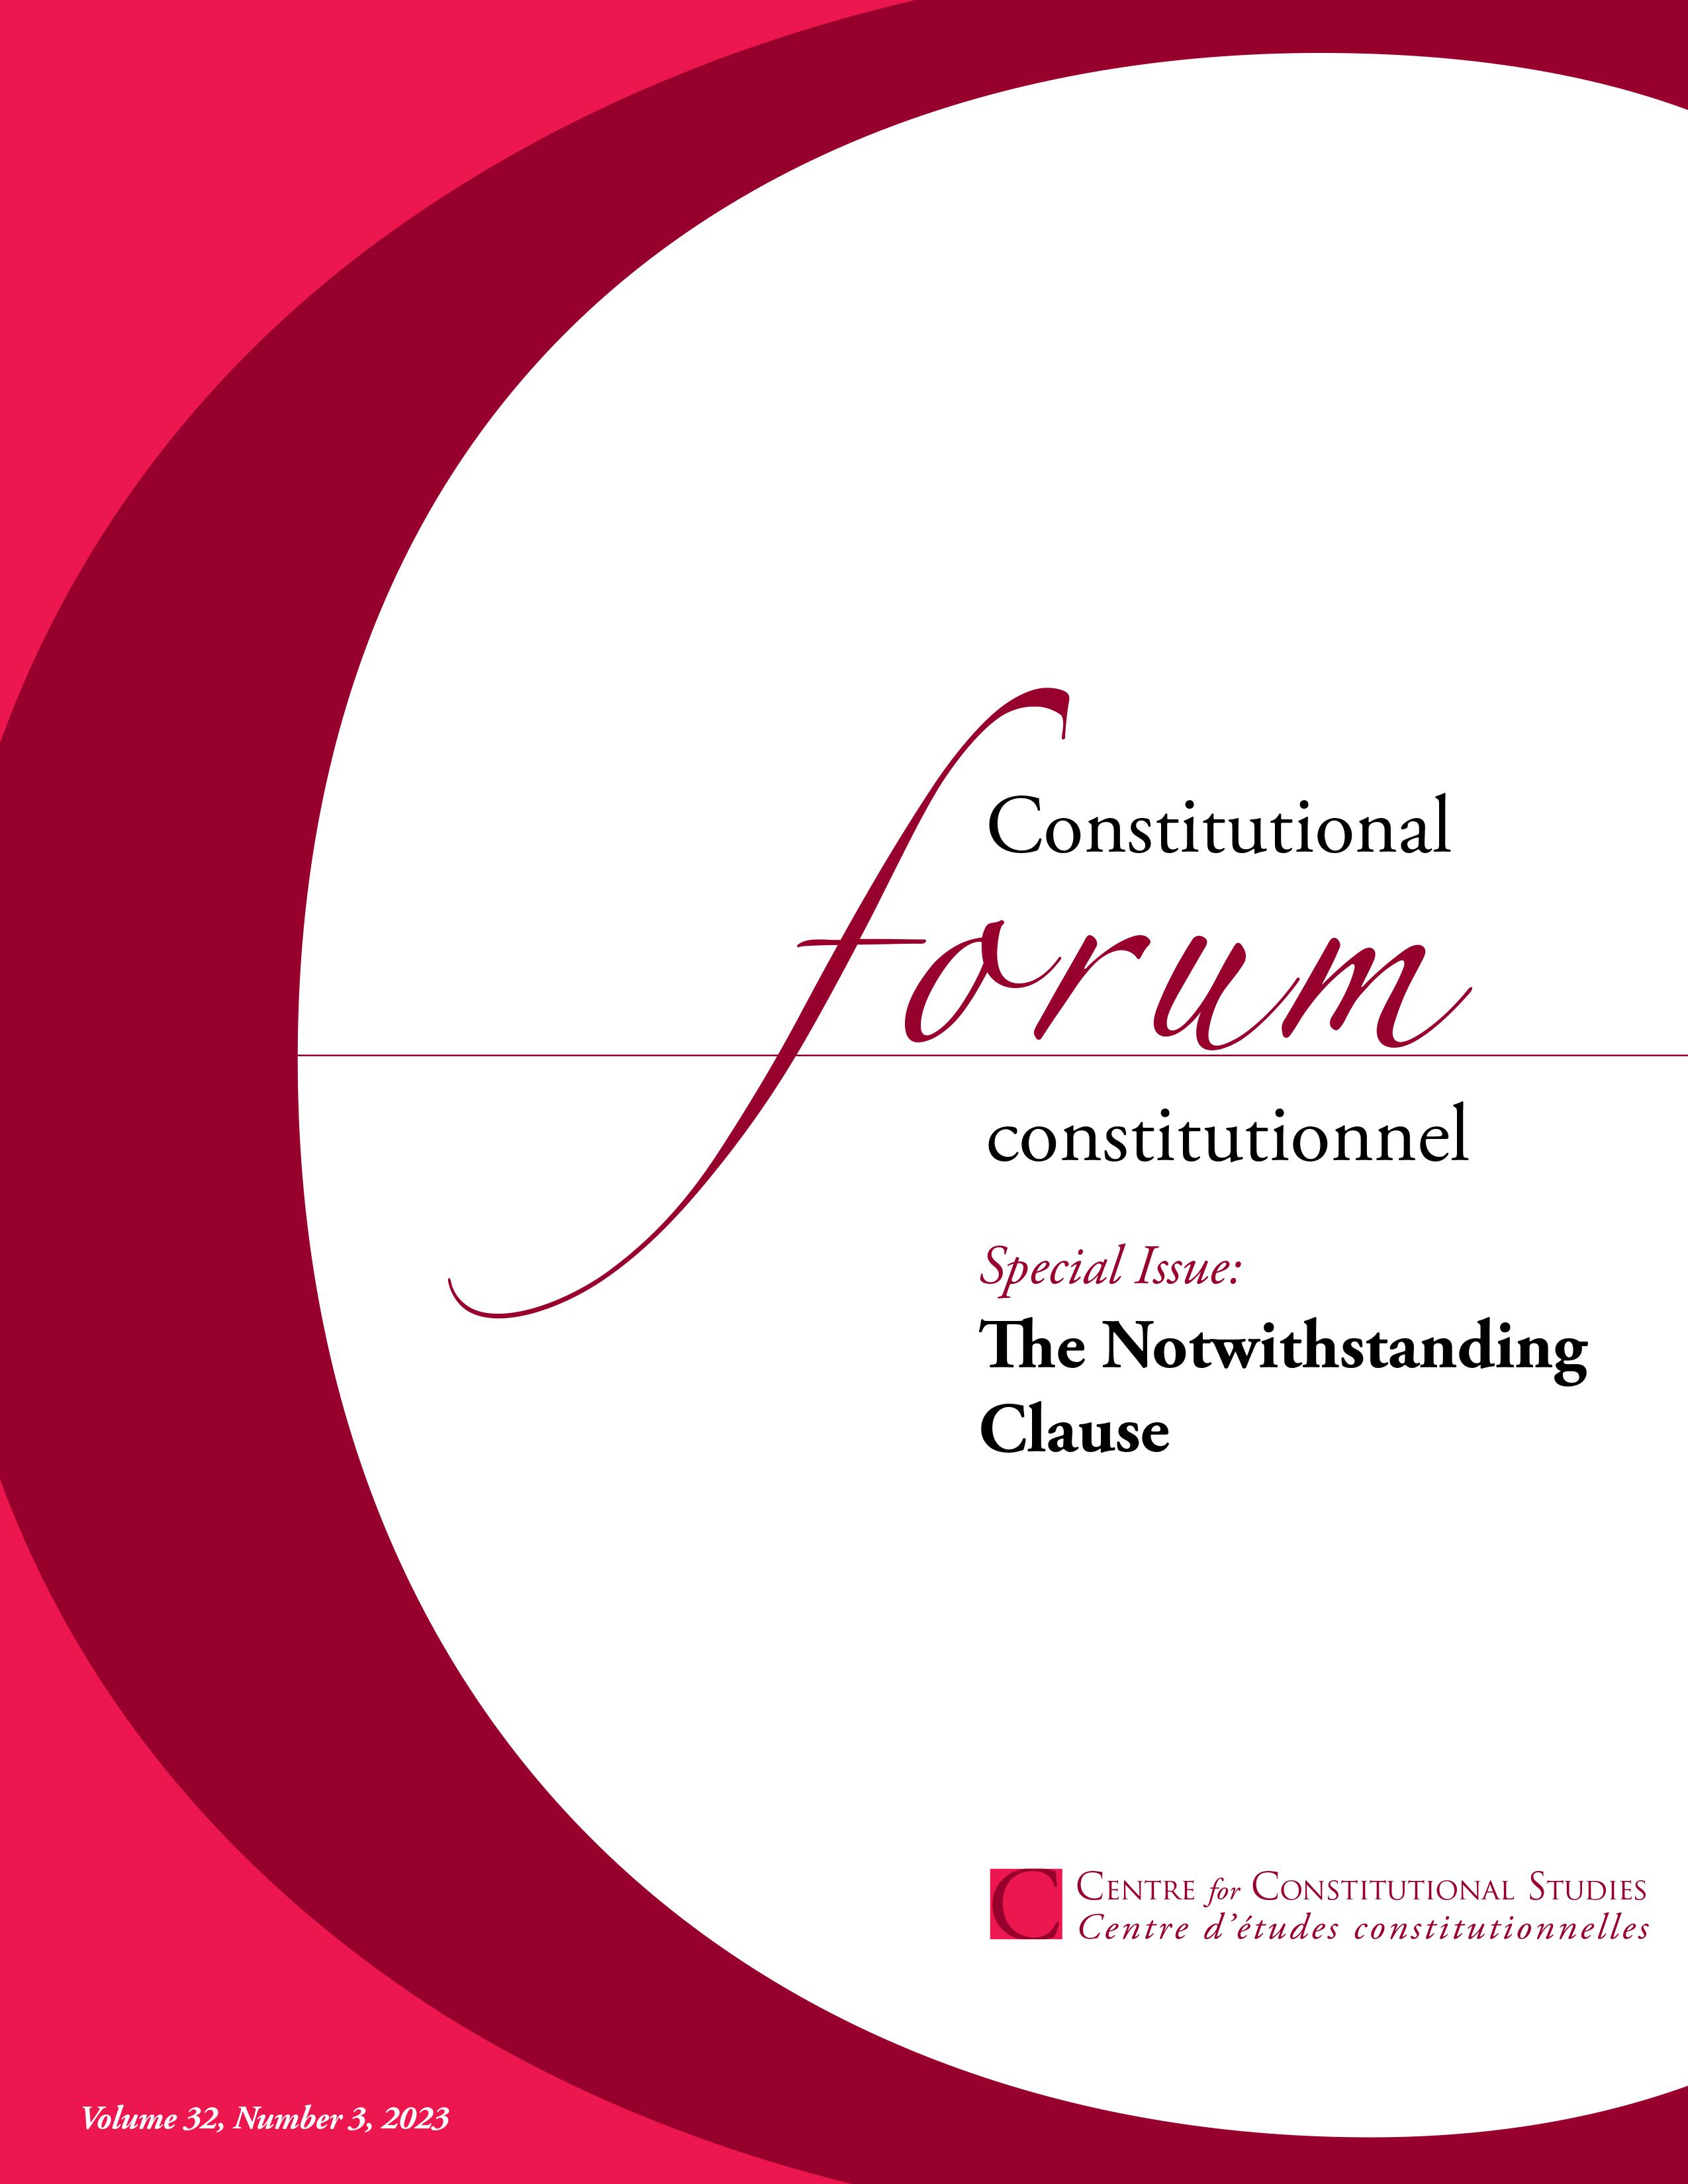 					View Vol. 32 No. 3 (2024): Special Issue: The Notwithstanding Clause
				